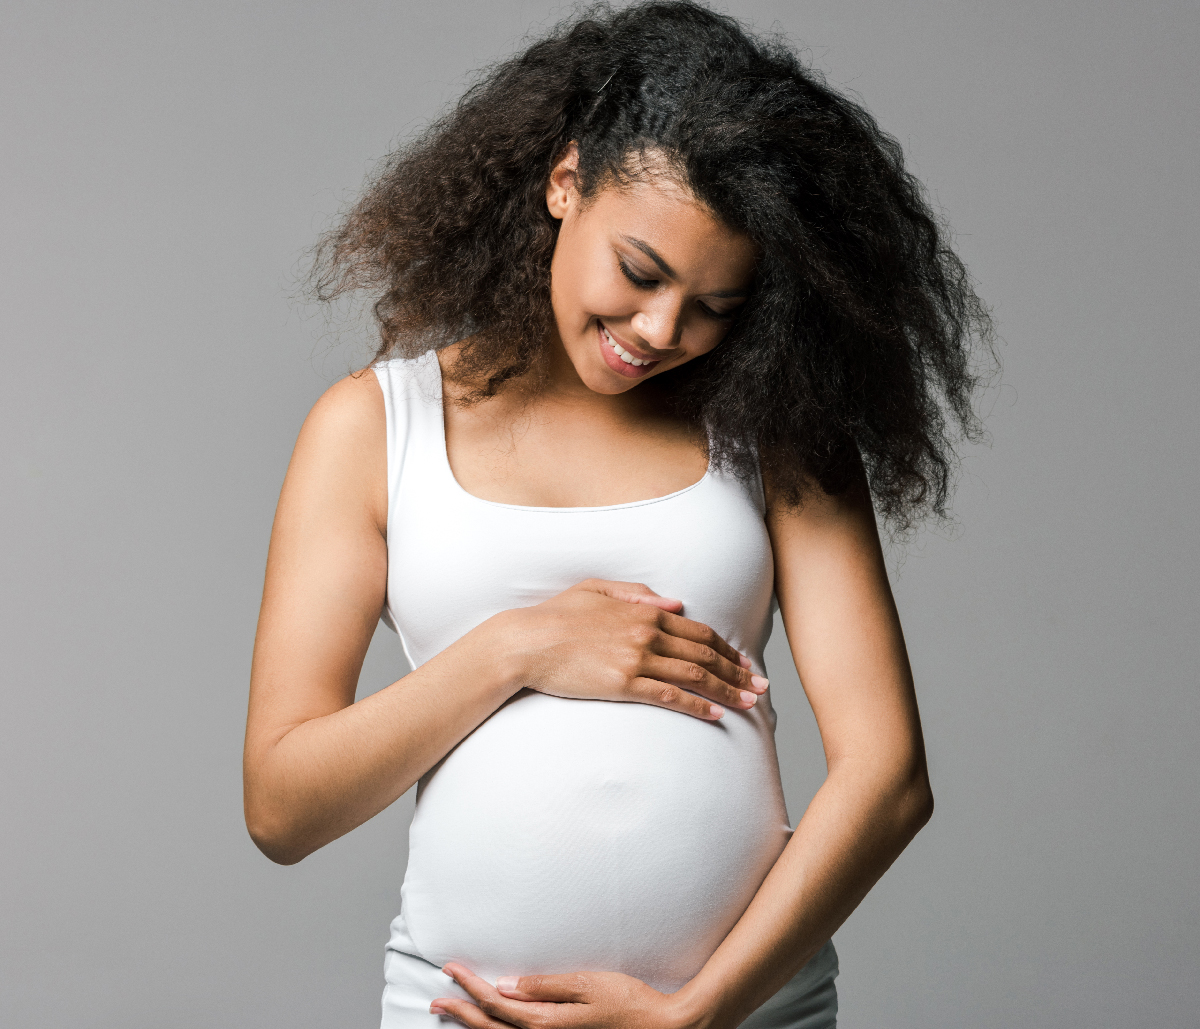 Diabetes and pregnancy don’t have to go together with preconception to postpartum visits